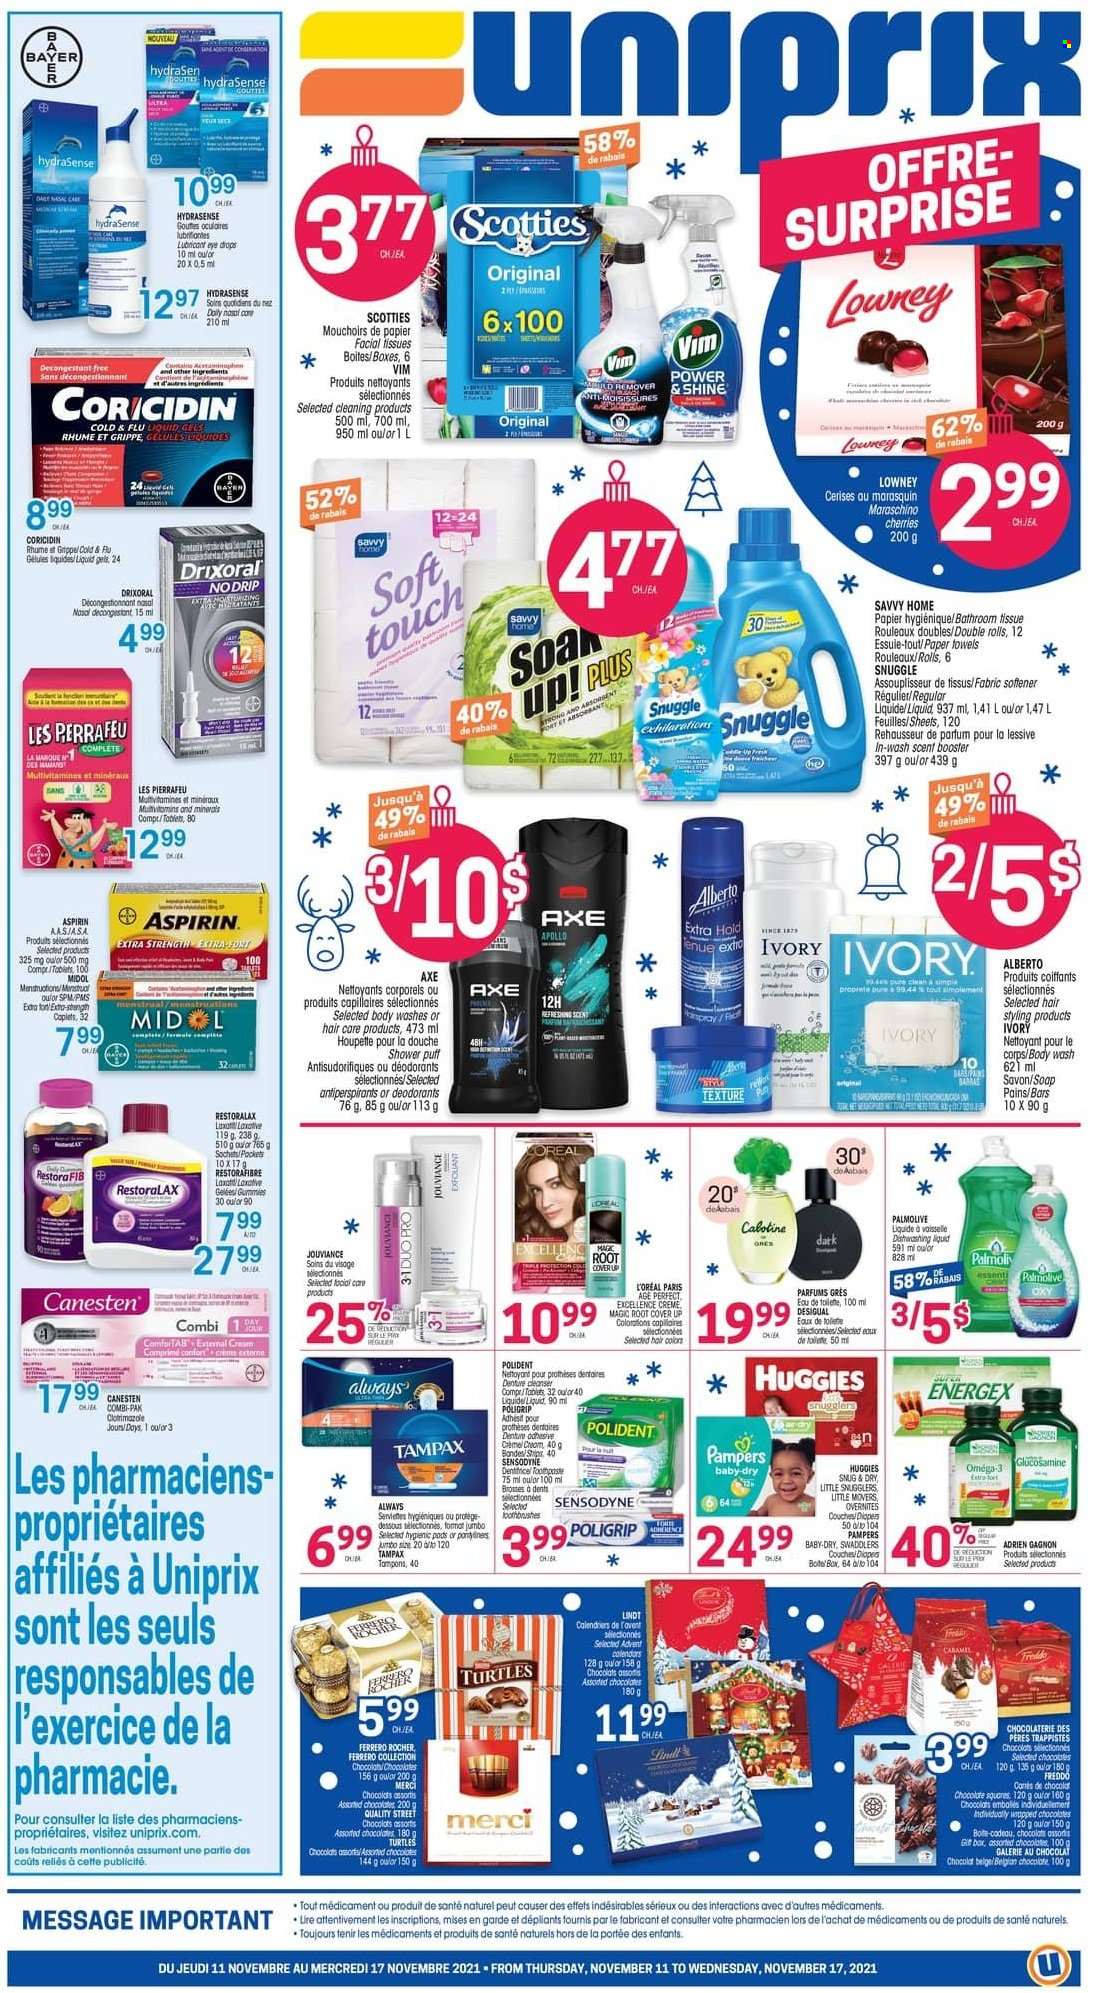 thumbnail - Uniprix Flyer - November 11, 2021 - November 17, 2021 - Sales products - chocolate, Merci, Maraschino cherries, nappies, bath tissue, kitchen towels, paper towels, Snuggle, fabric softener, body wash, Palmolive, soap, Polident, tampons, facial tissues, L’Oréal, lubricant, Coricidin, Cold & Flu, glucosamine, Omega-3, aspirin, Bayer, Tampax, Huggies, Pampers, Sensodyne, Lindt, Ferrero Rocher, deodorant. Page 1.